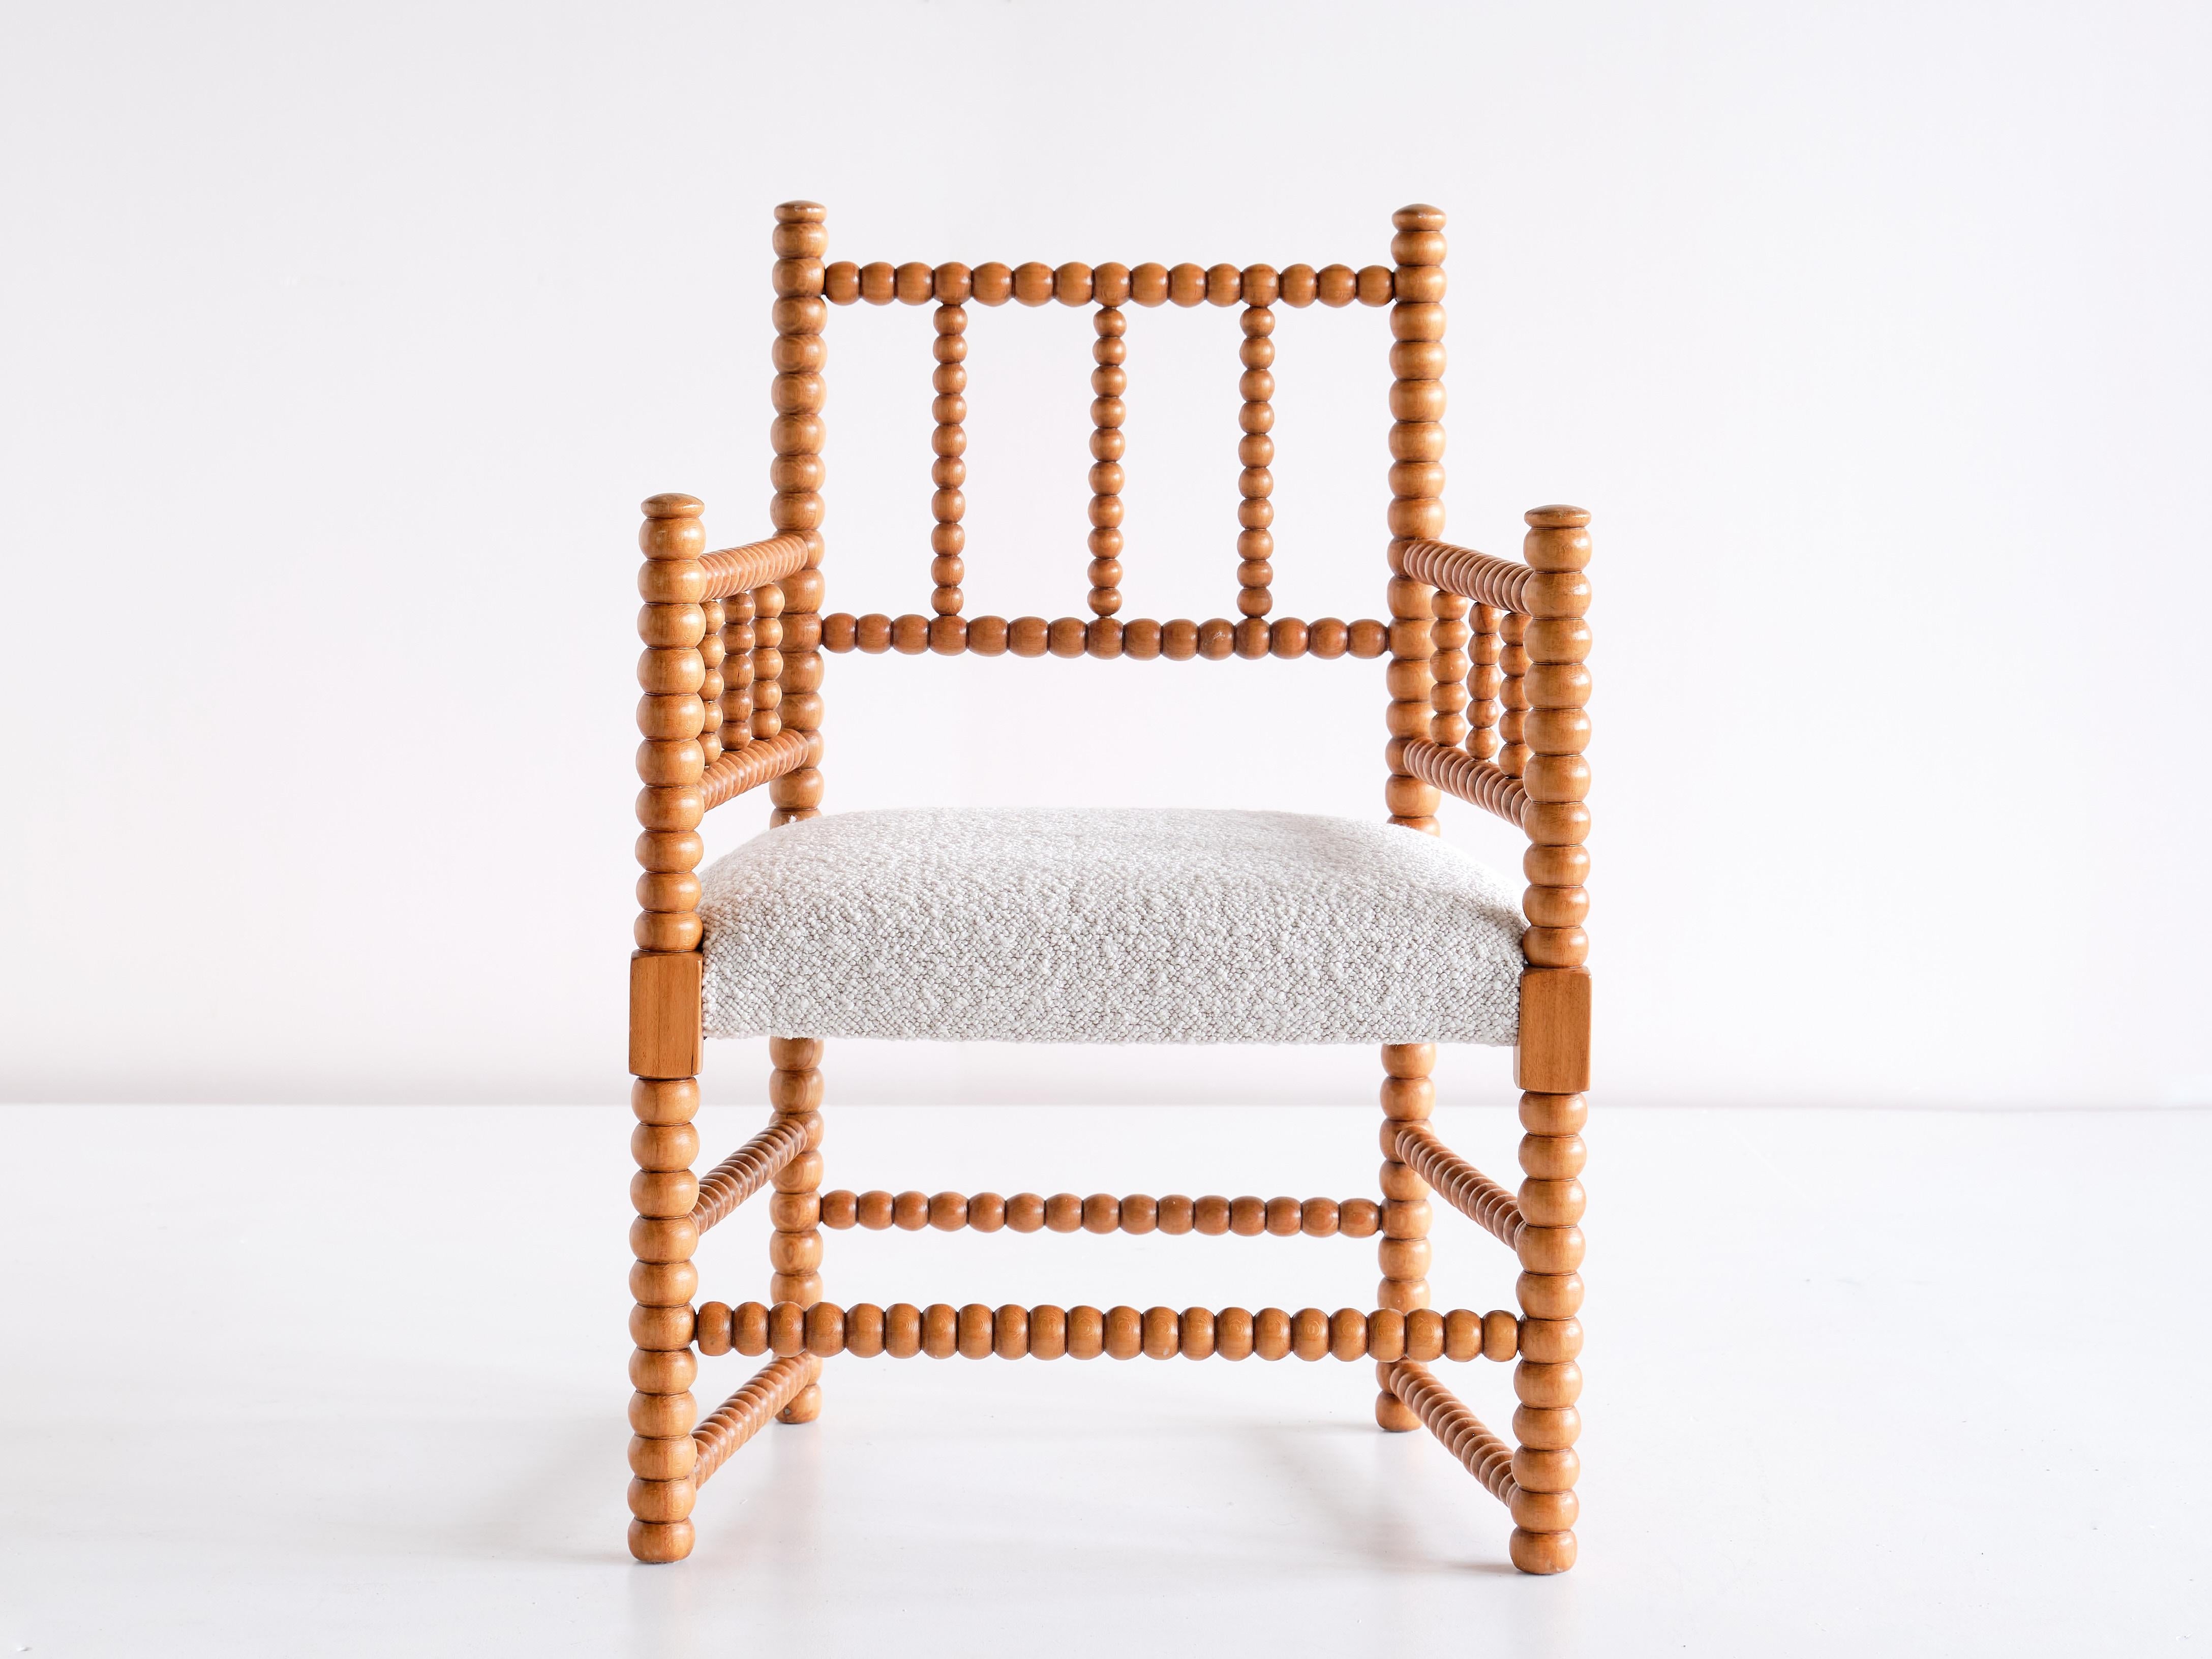 This charming small side chair was made in the Netherlands in the late 19th century. Every section of the frame has beautifully turned solid beech wood elements creating the bobbin structure. The seat has been fully reconditioned and newly